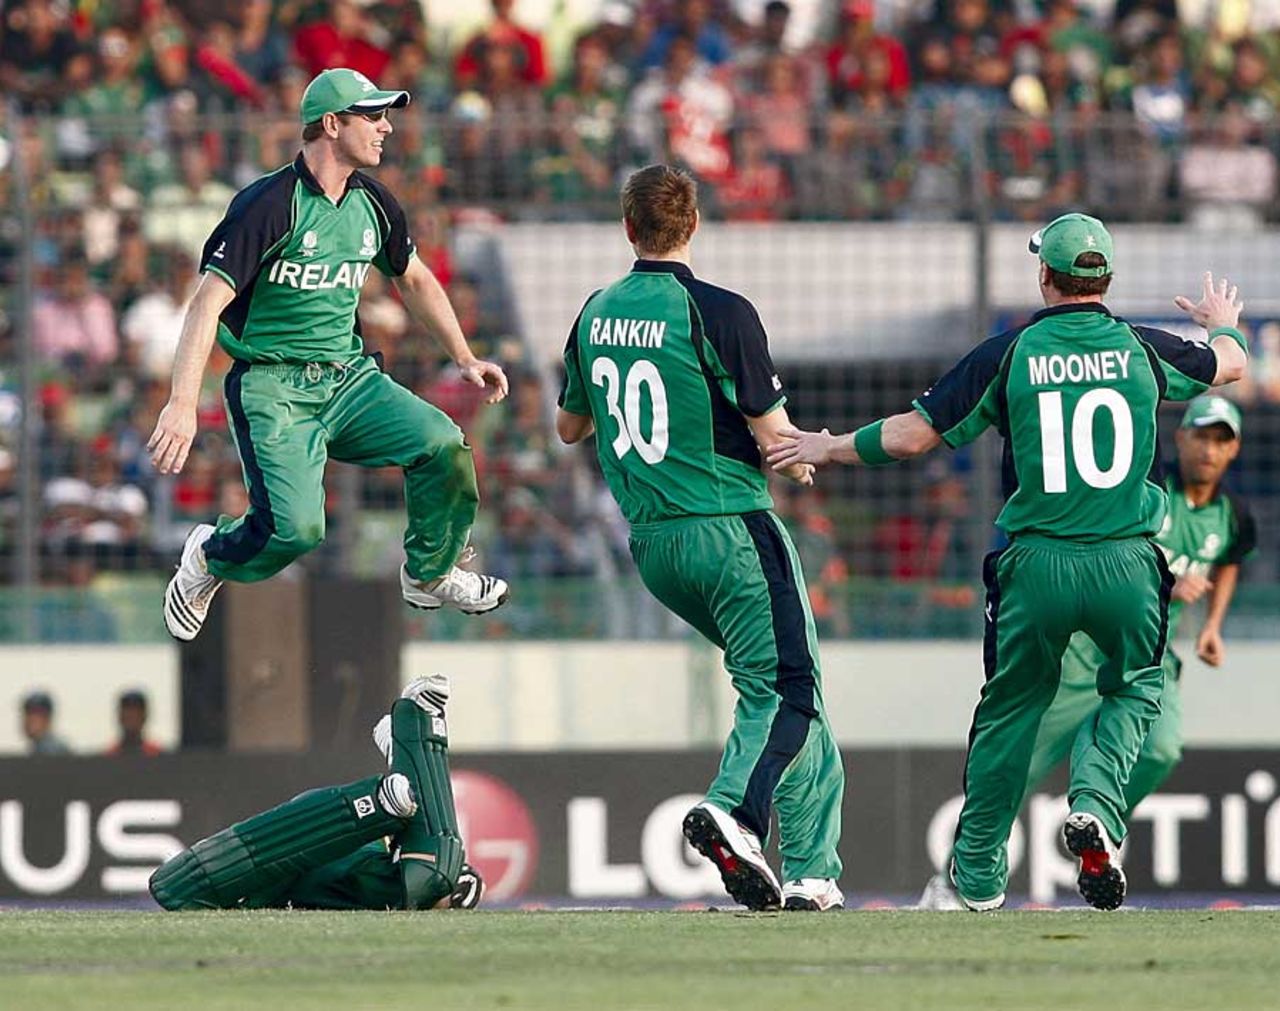 Raqibul Hasan is left sprawling on the ground after being run out by Andrew White, Bangladesh v Ireland, World Cup 2011, Mirpur, February 25, 2010
